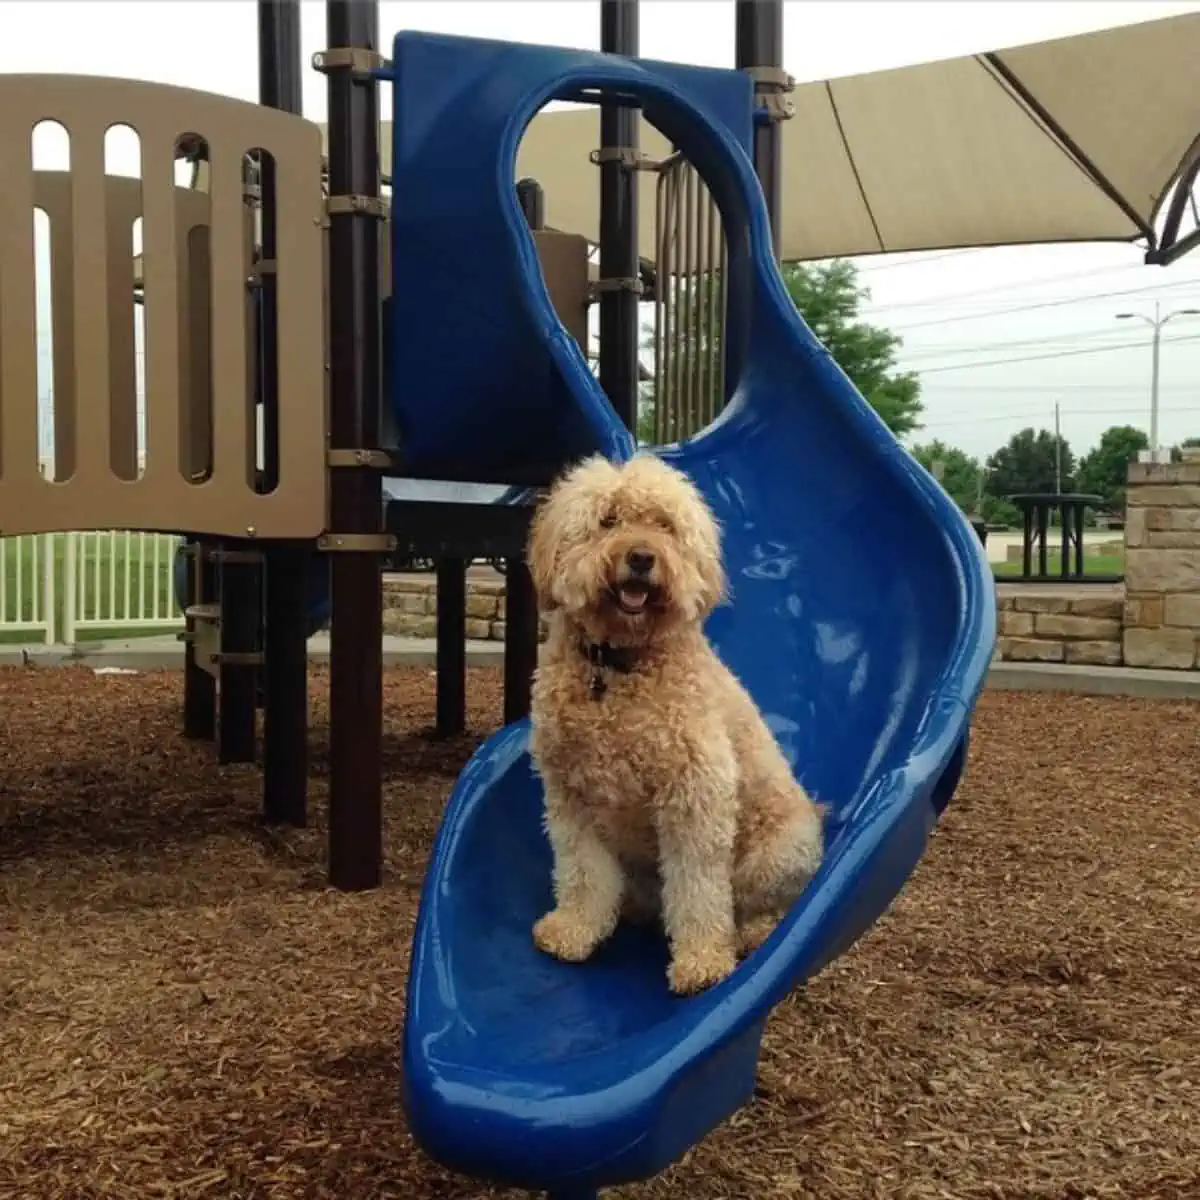 Goldendoodle at the playground